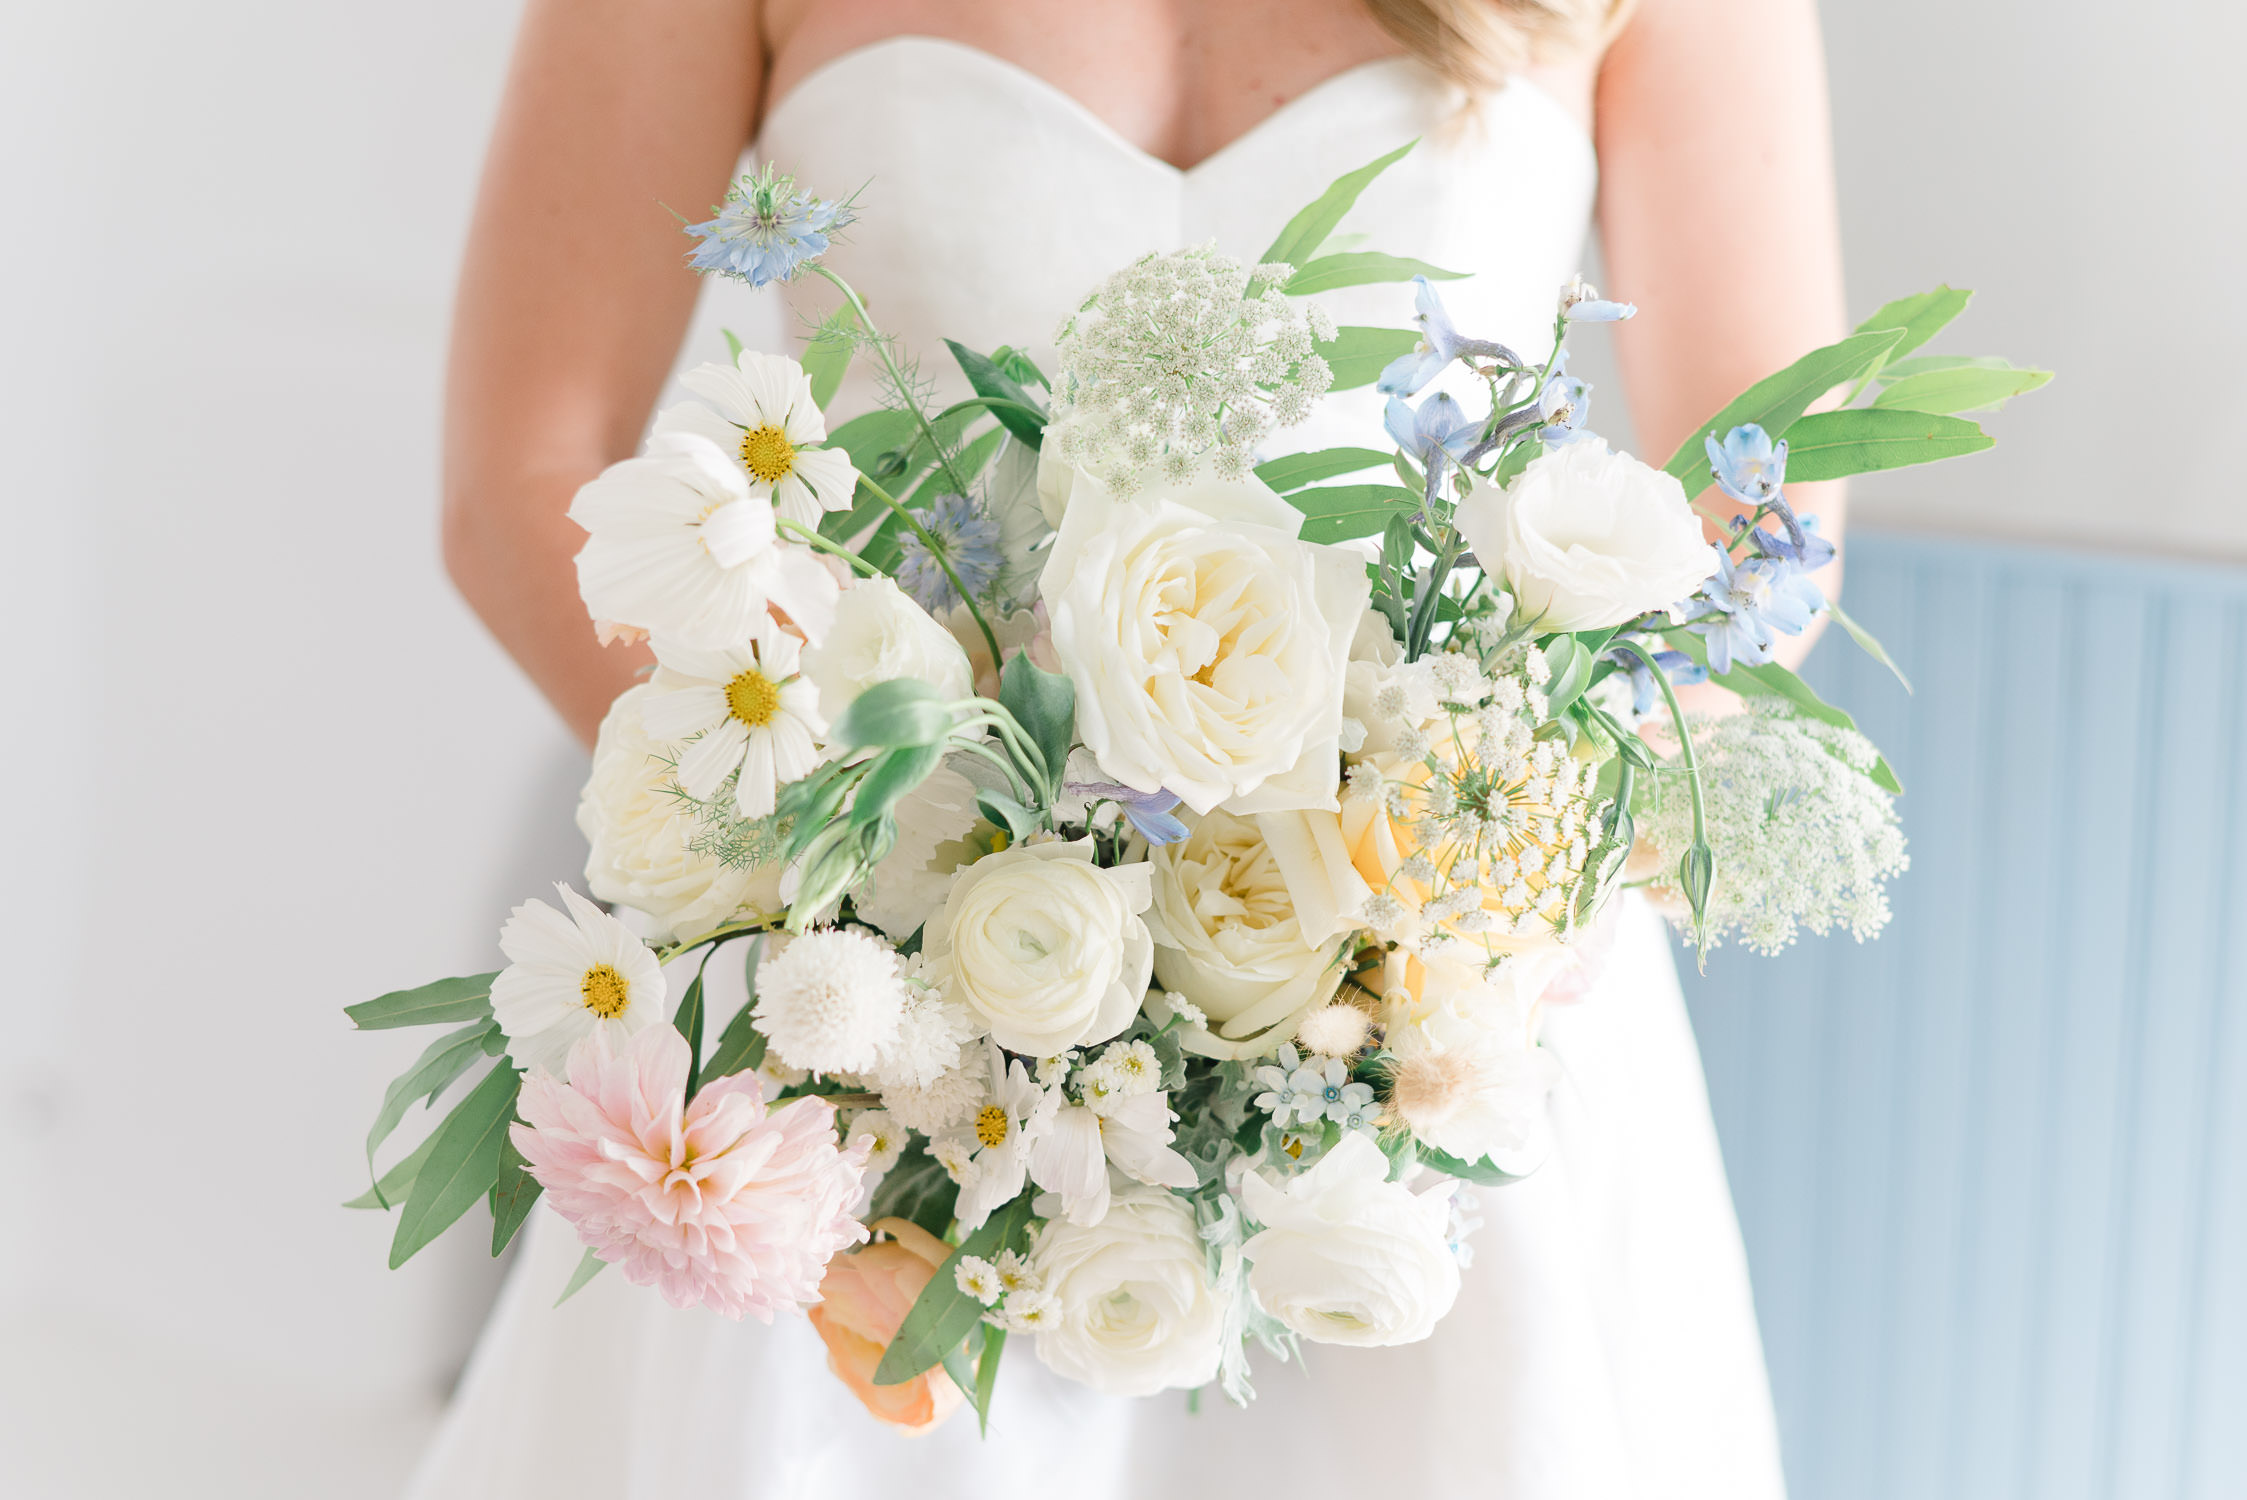 Close up of bride holding wedding bouquet with blue, pink and white flowers.